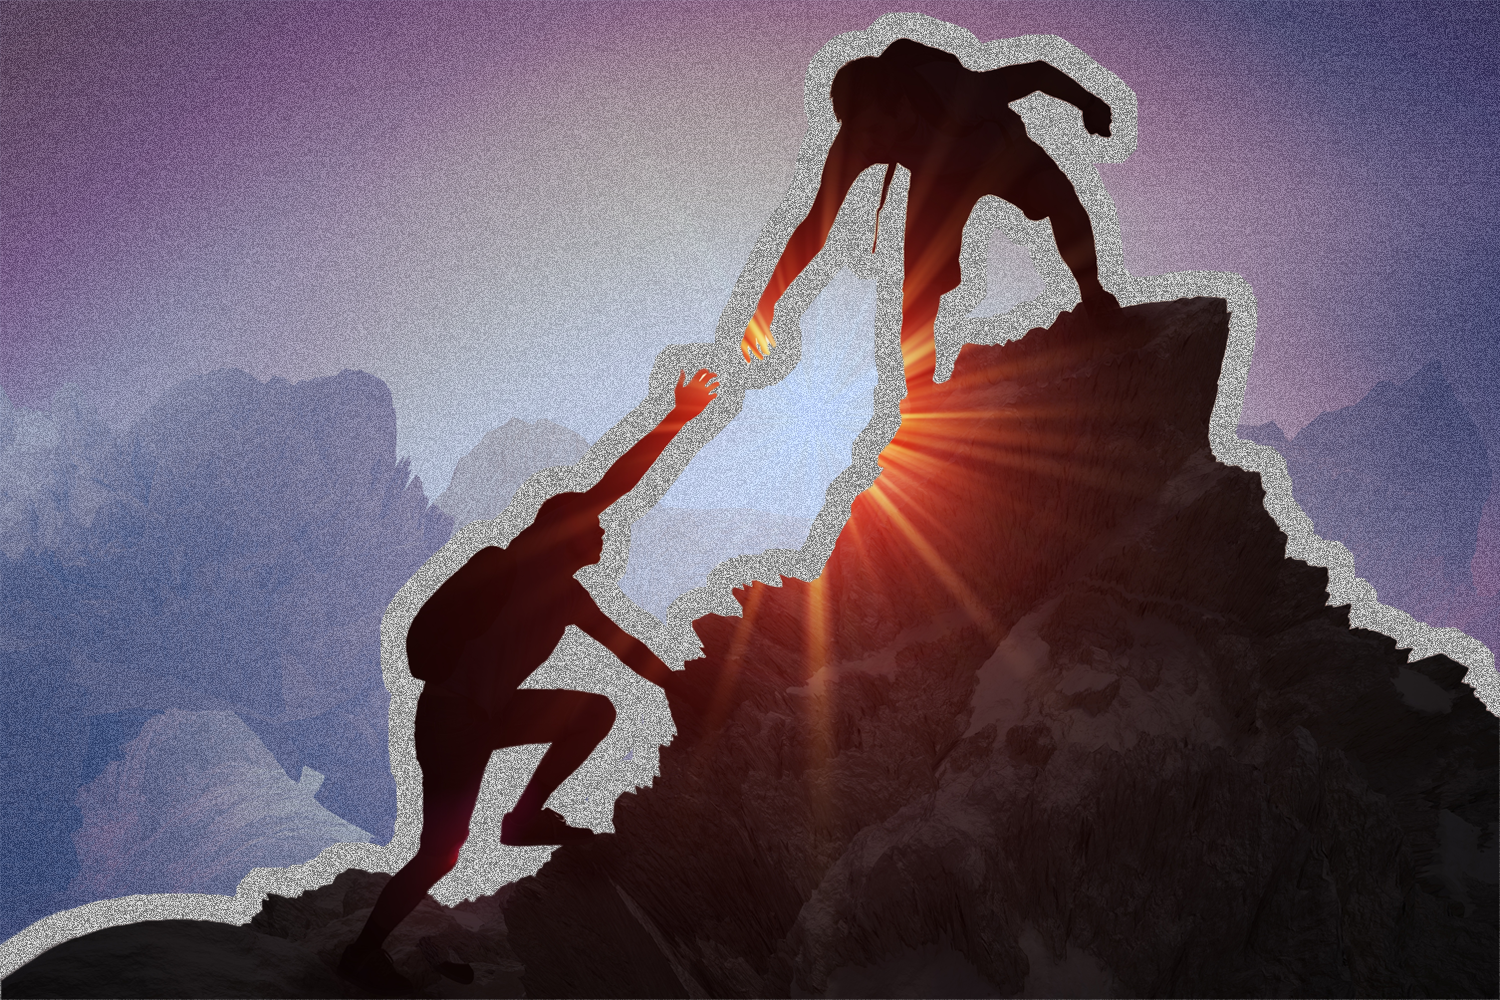 Person on a mountain reaching out for a hand from person at the top.